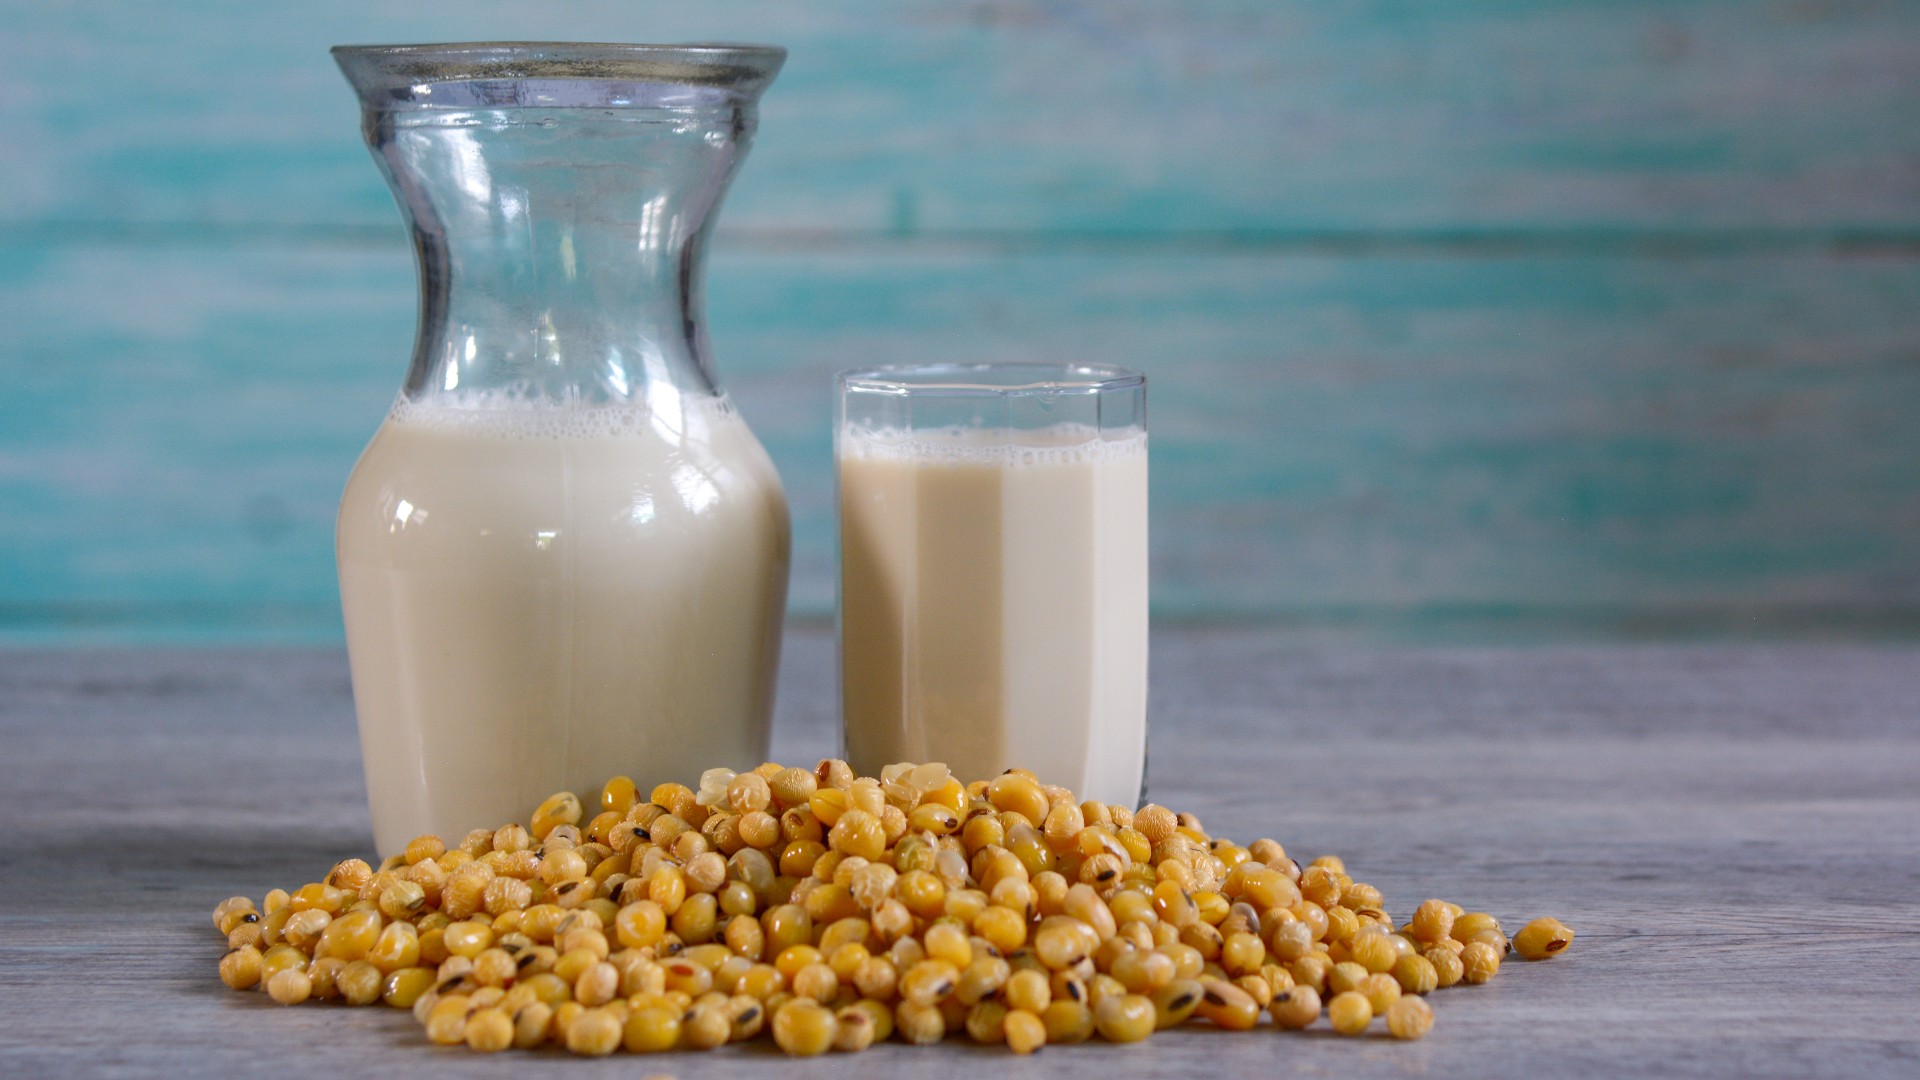 Soy milk in bottle and glass with soybeans in front